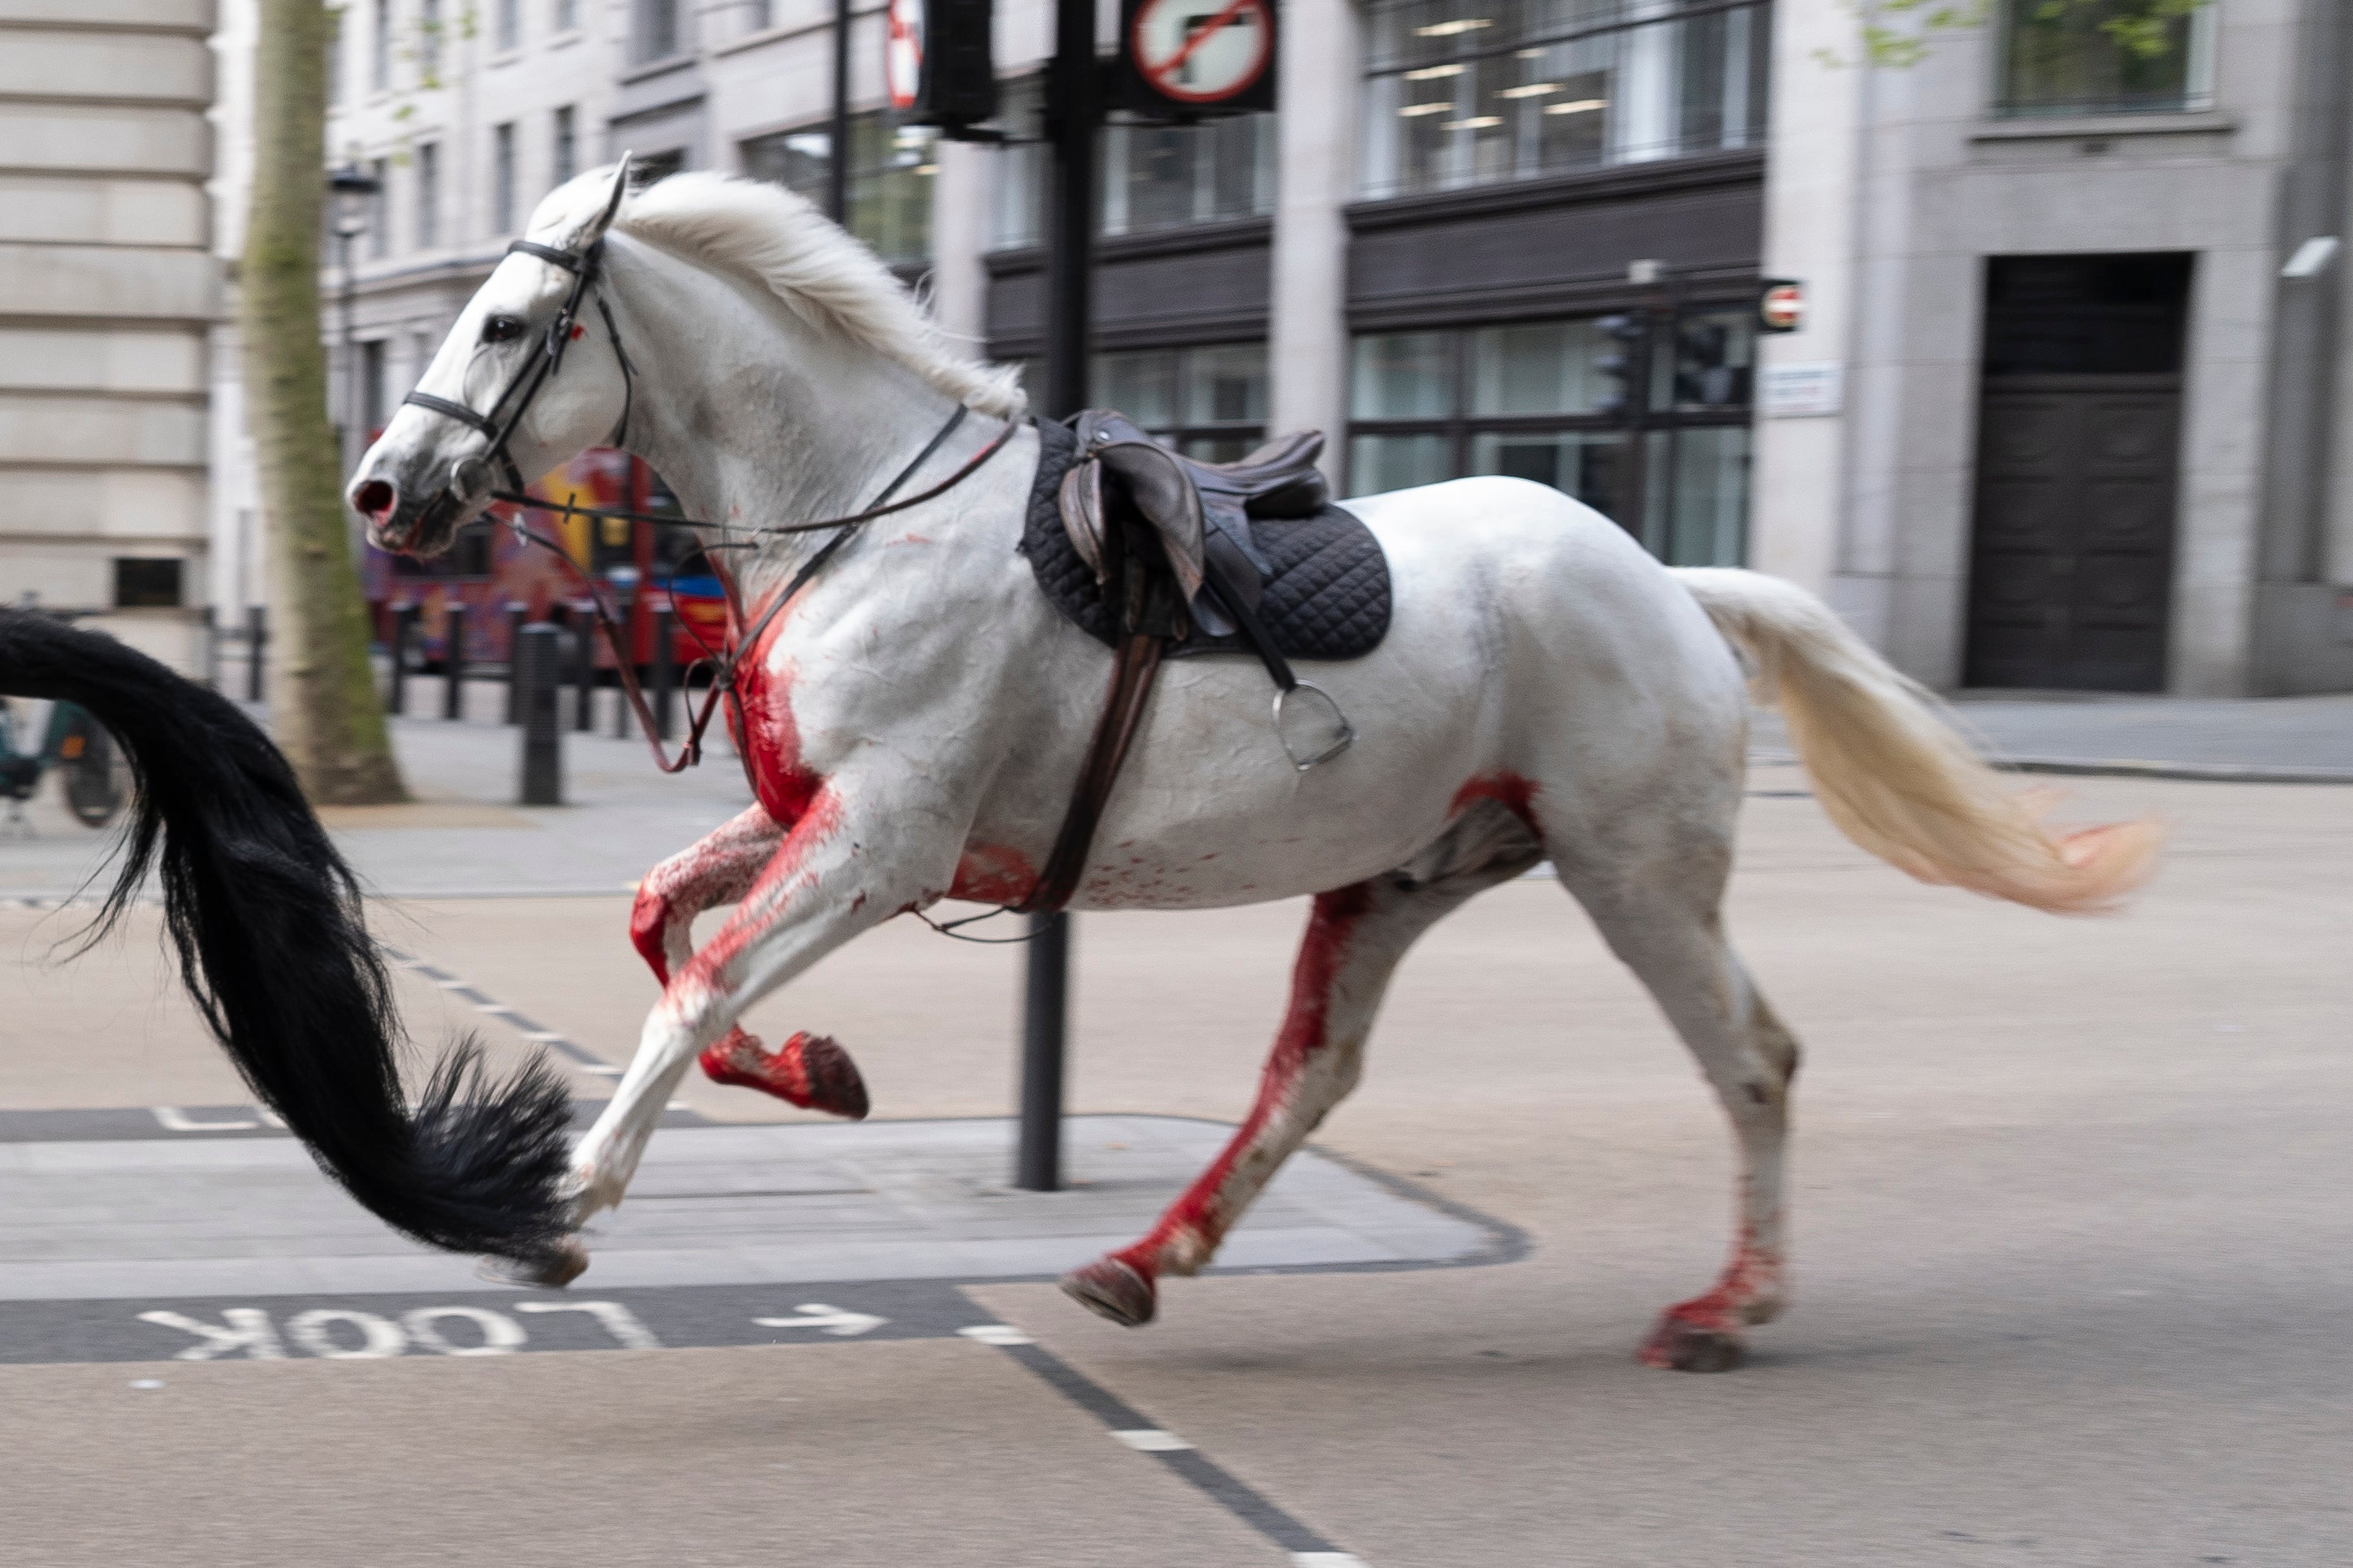 london, household cavalry regiment, army issues update on injured household cavalry horses that rampaged across london